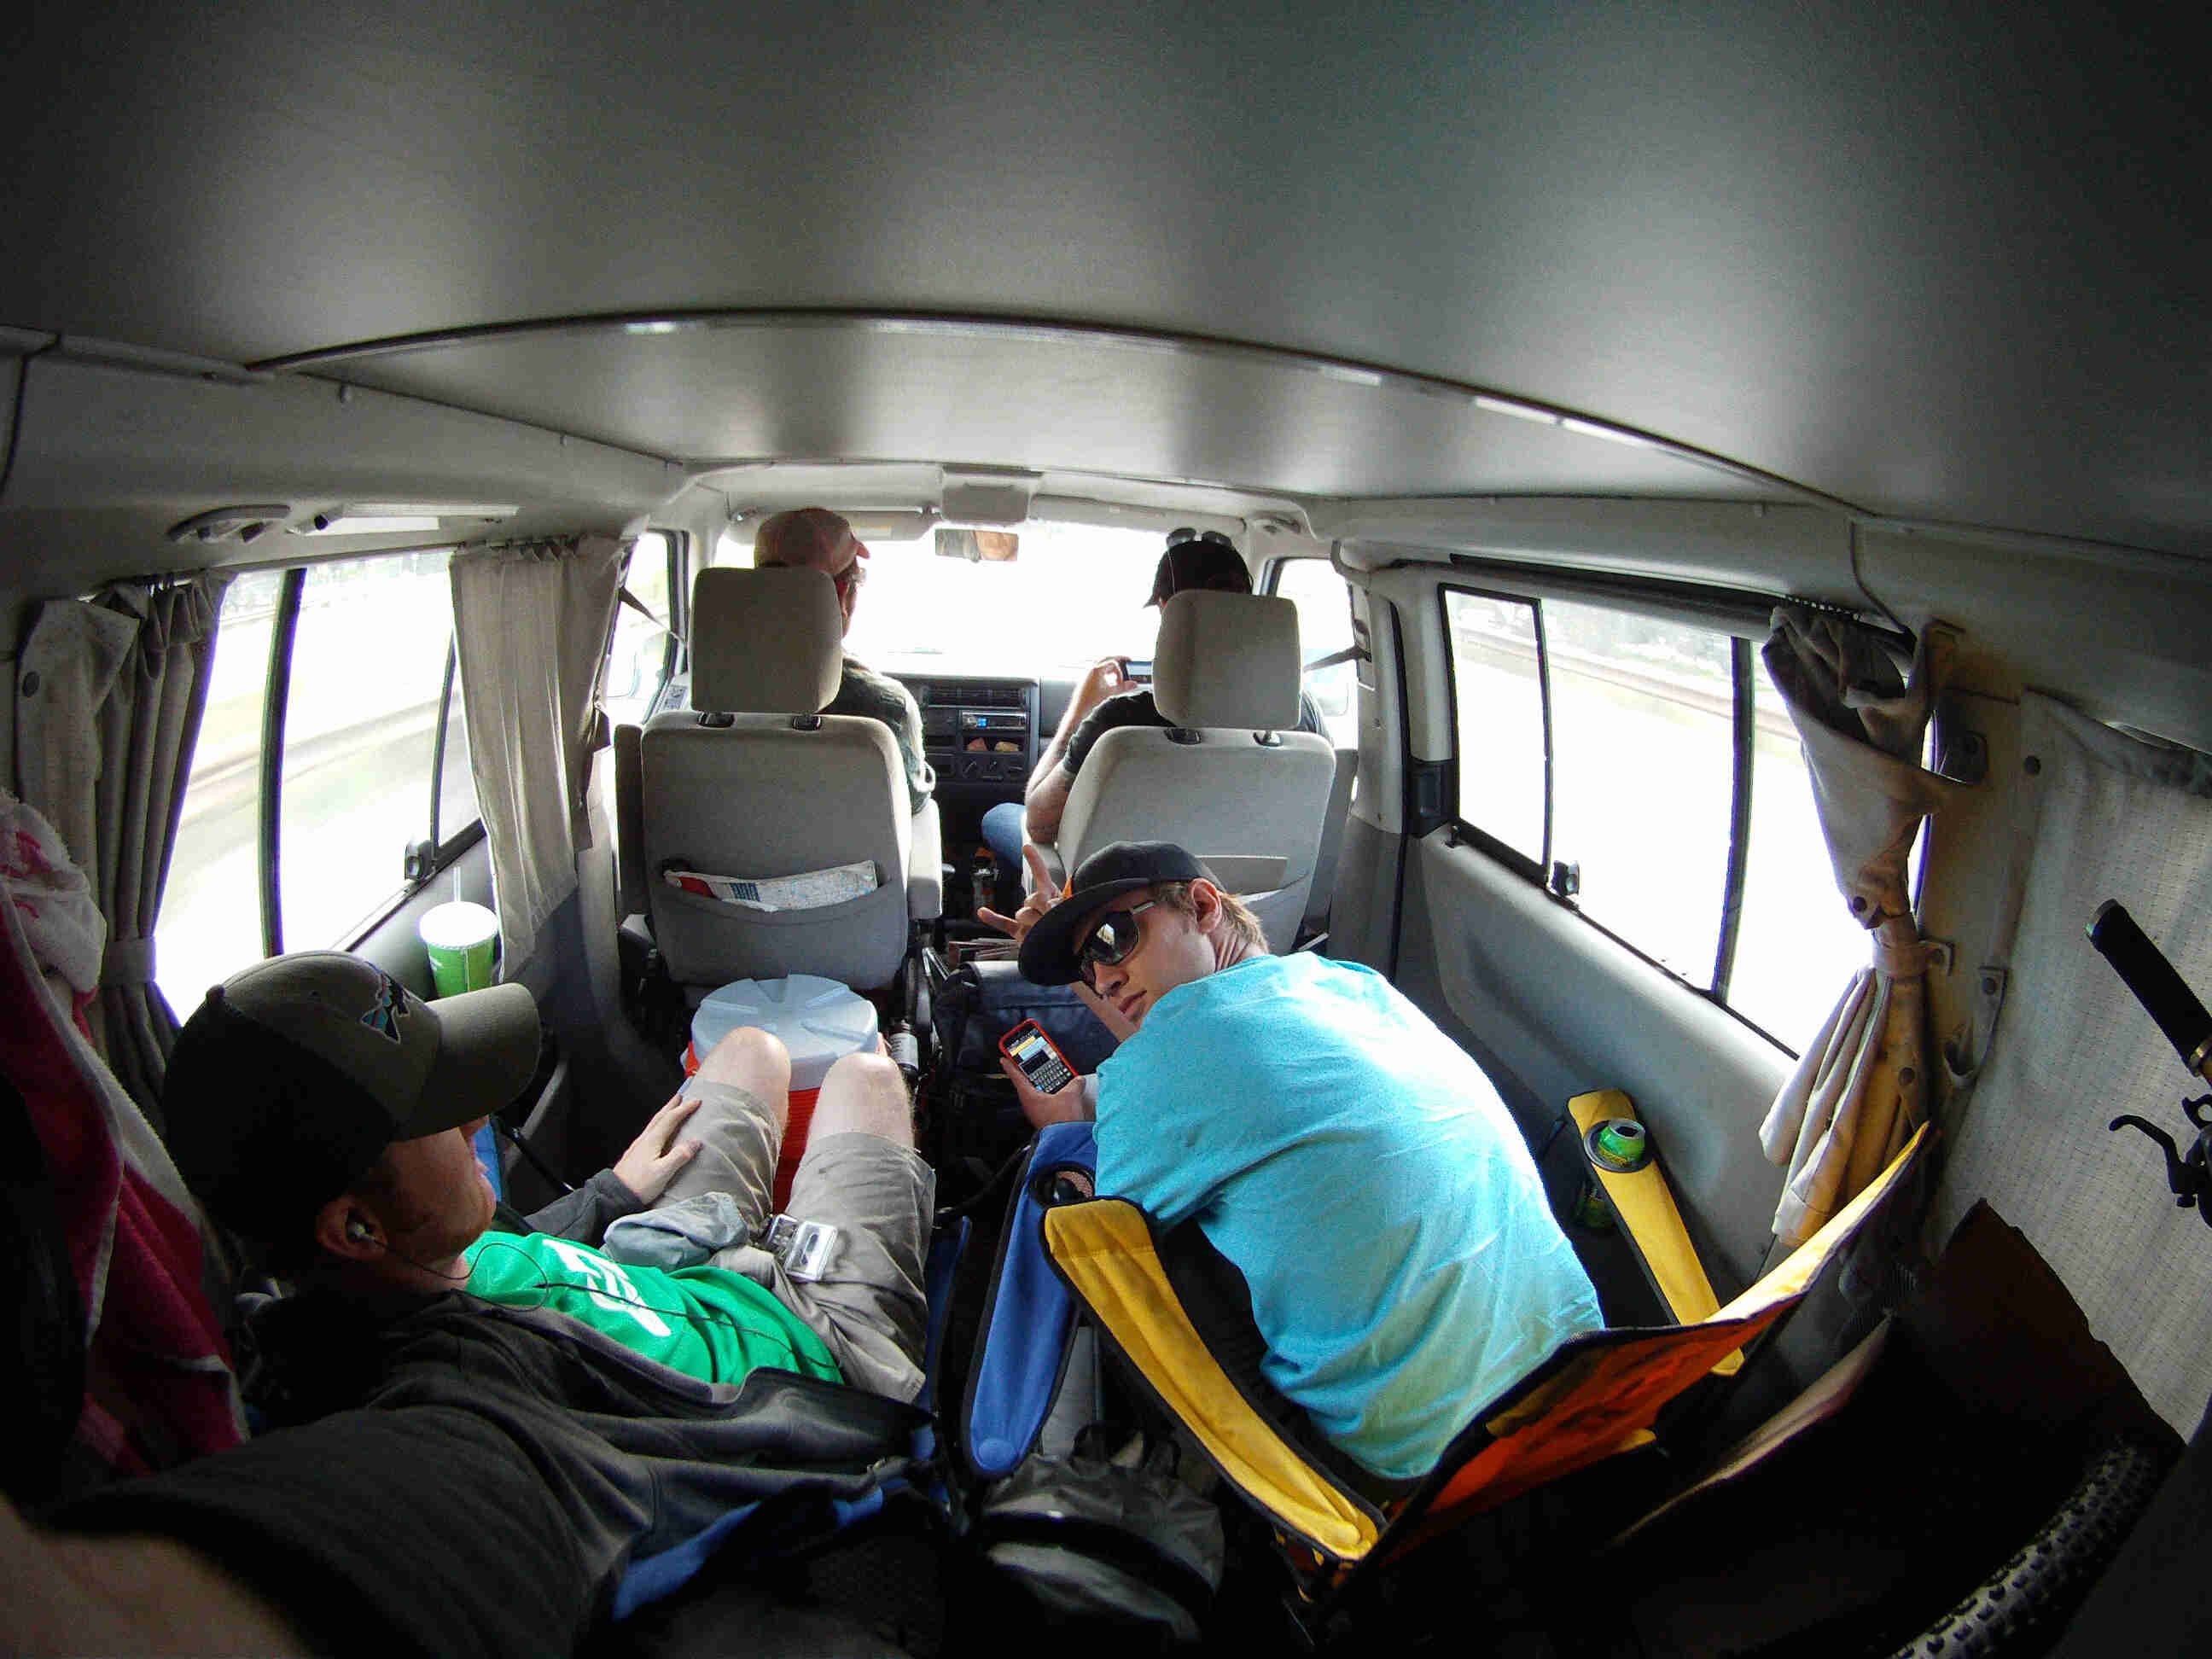 Back to front view of the inside of a van, with 2 people sitting in back seats and 2 people sitting in front seats